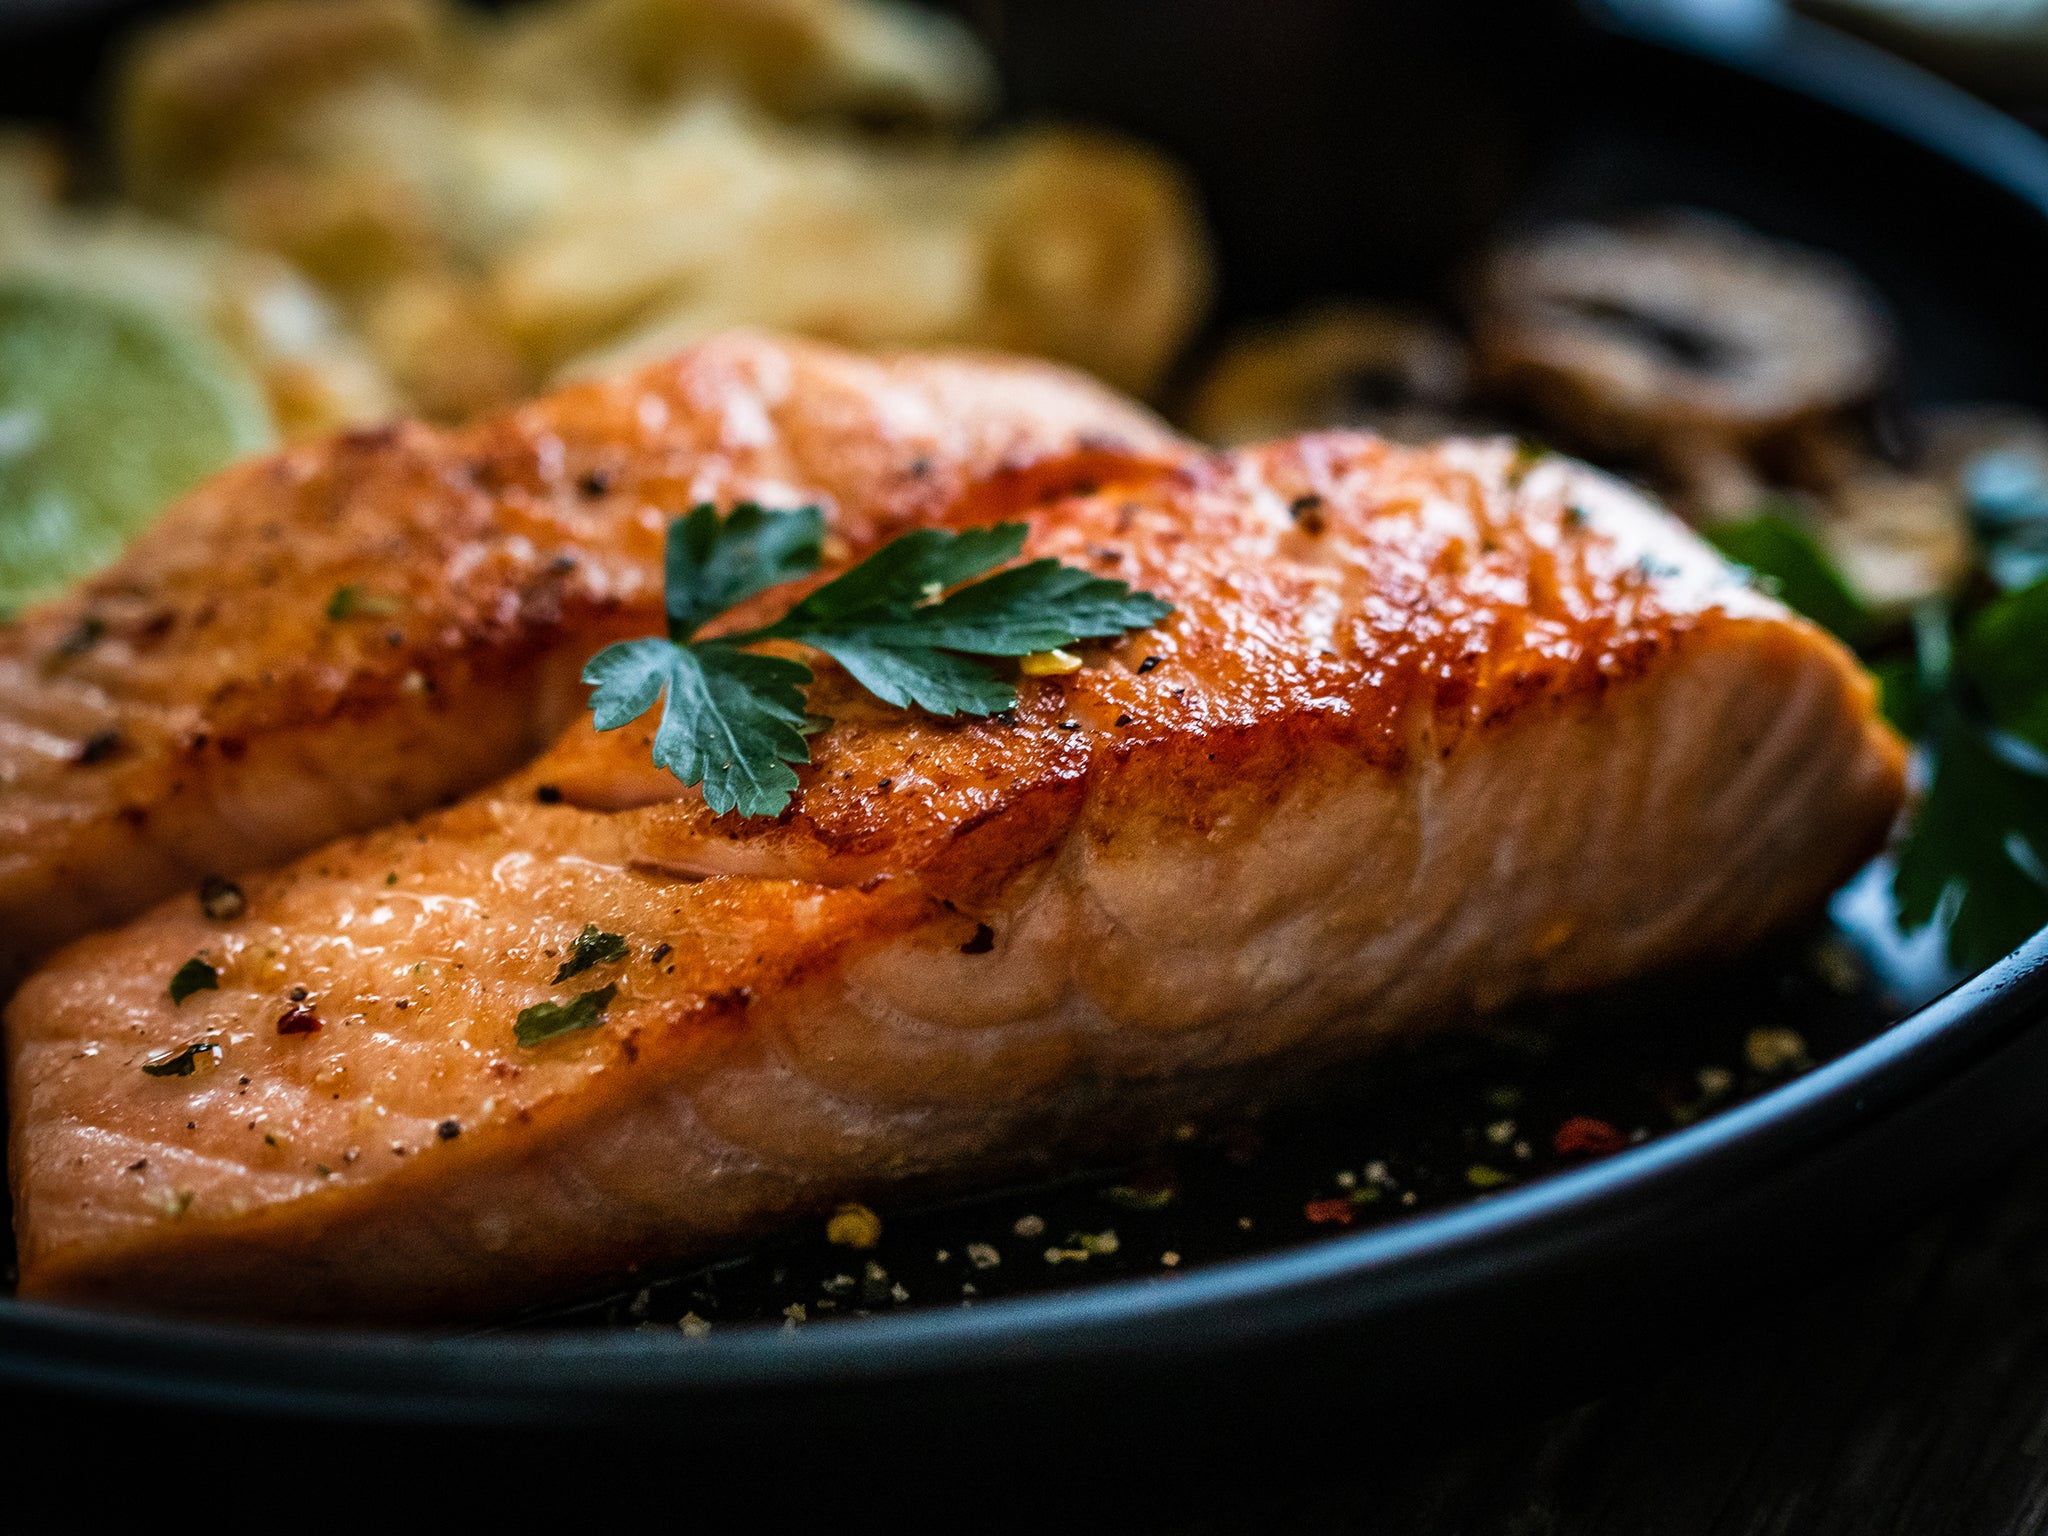 A quick stint under the grill transforms this bright, rich and sweet salmon dish